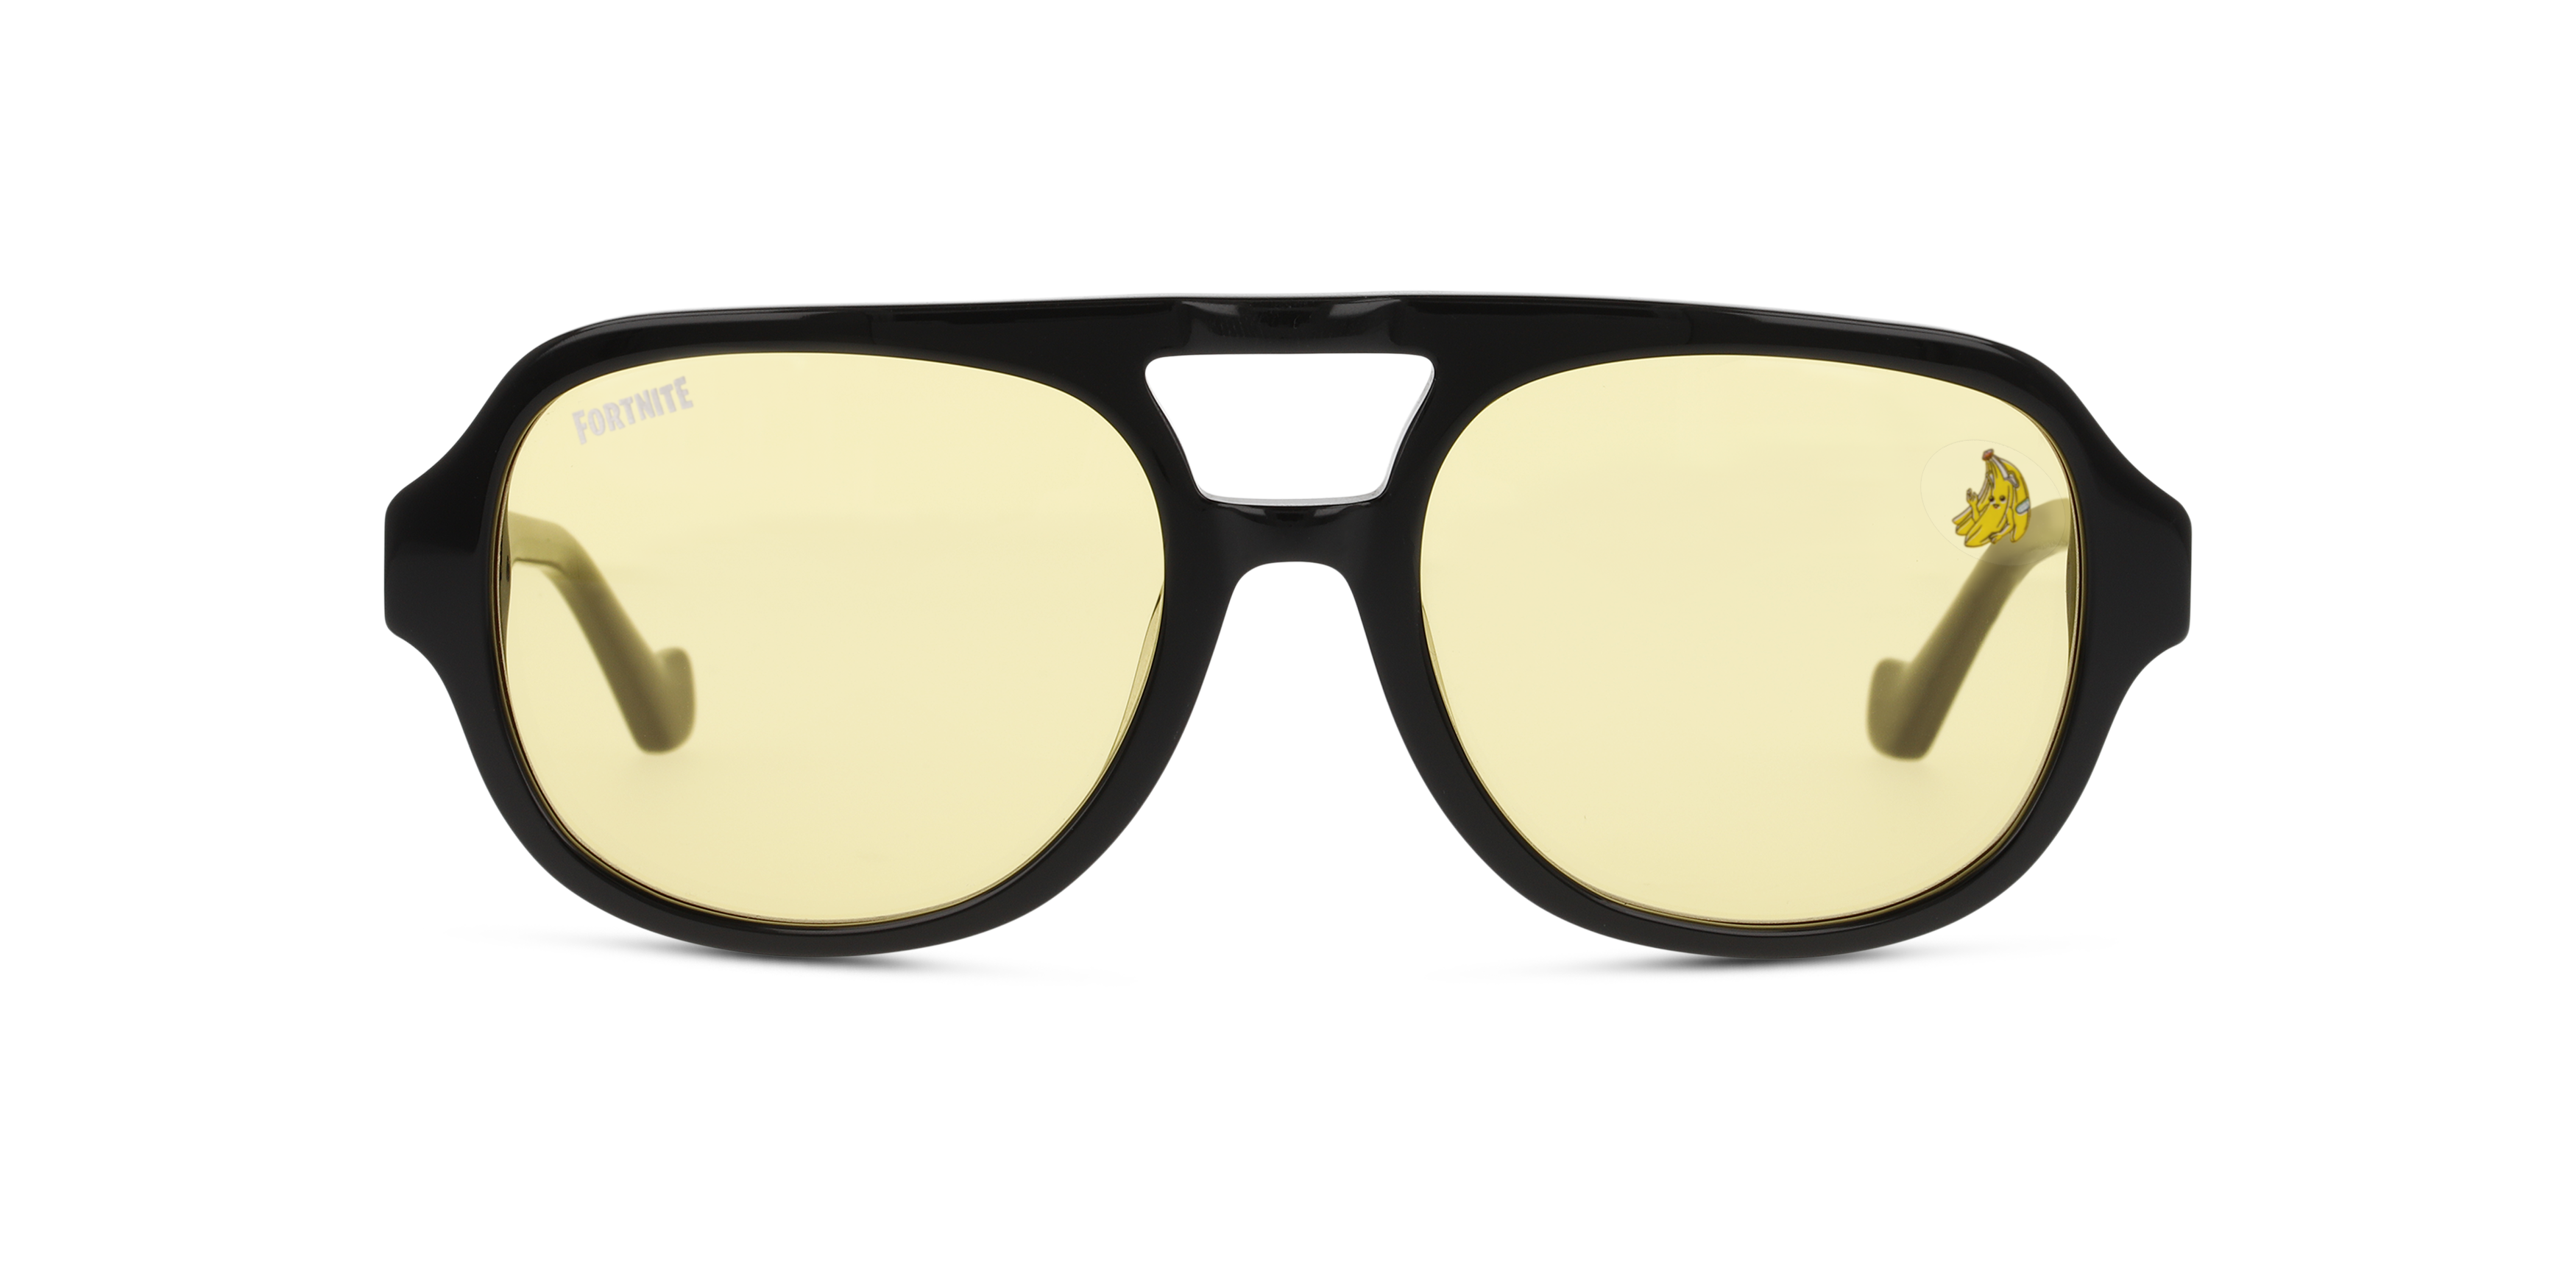 Front Fortnite with Unofficial UNSU0126 Sunglasses Yellow / Black